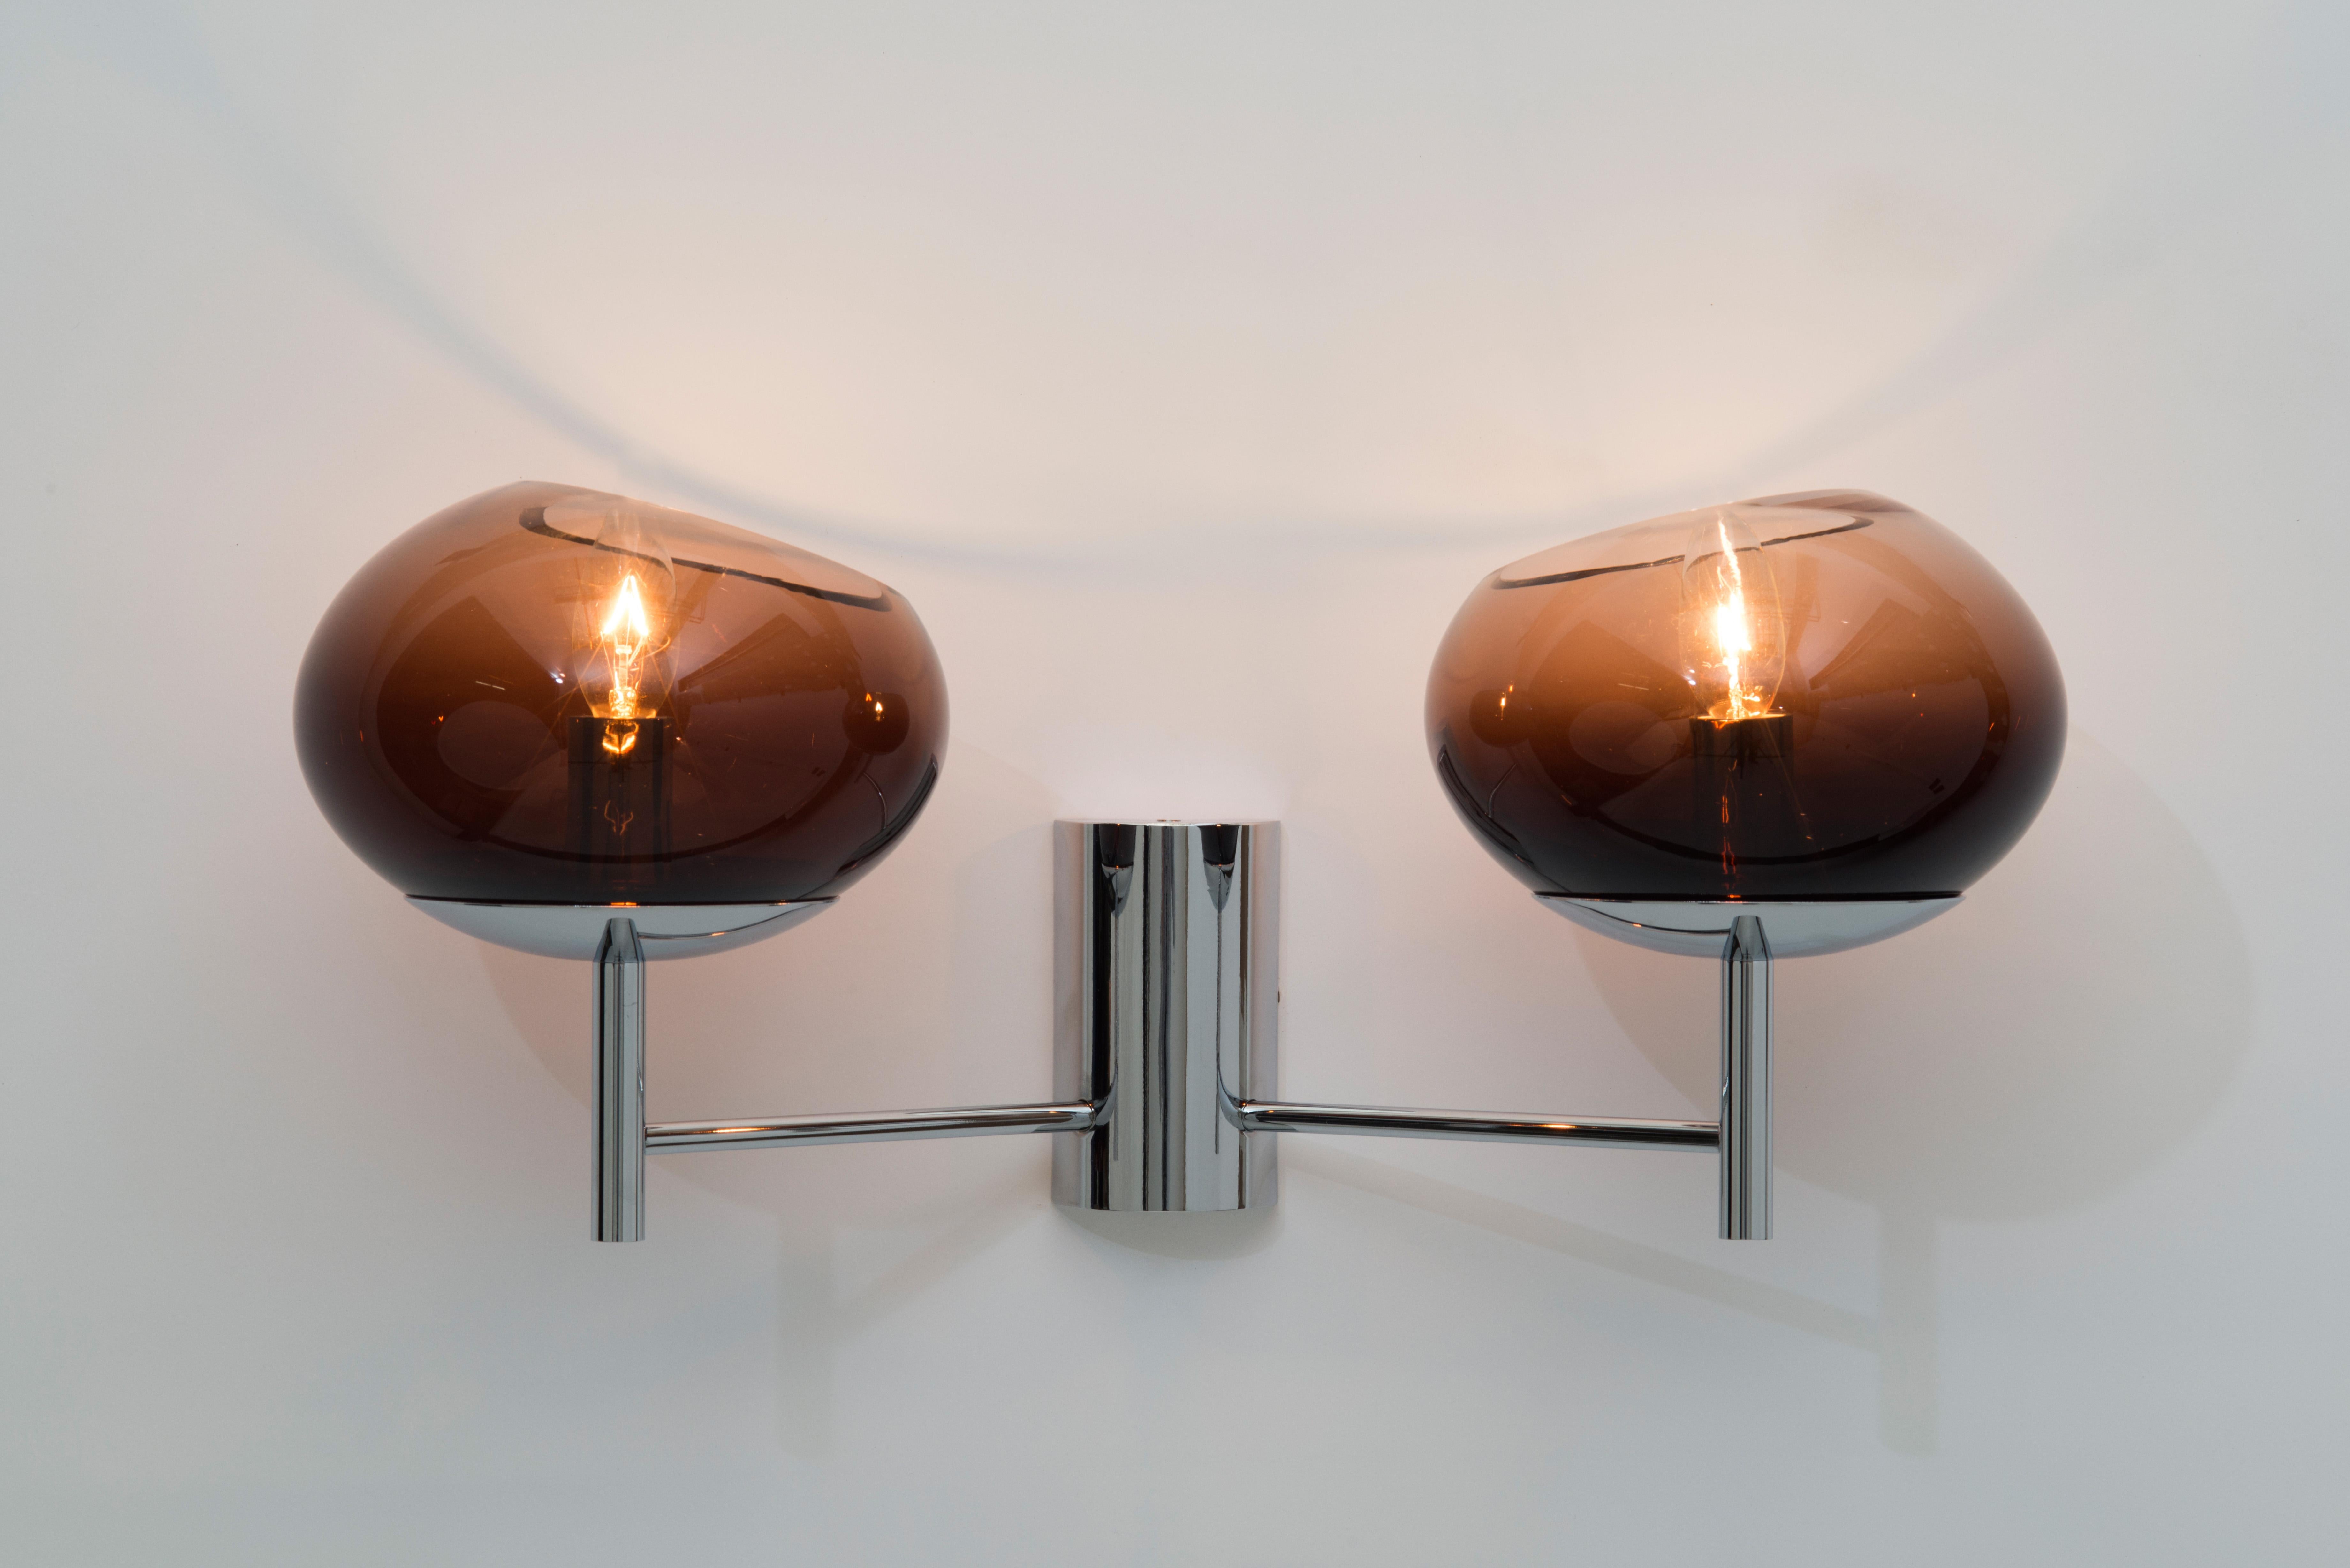 This handblown glass sconce epitomizes the 1970s chic lifestyle and look that Angelo Donghia was known for and that remains part of the Donghia aesthetic and DNA. This sconce boasts a graduation in density of color creating an ombre effect. The